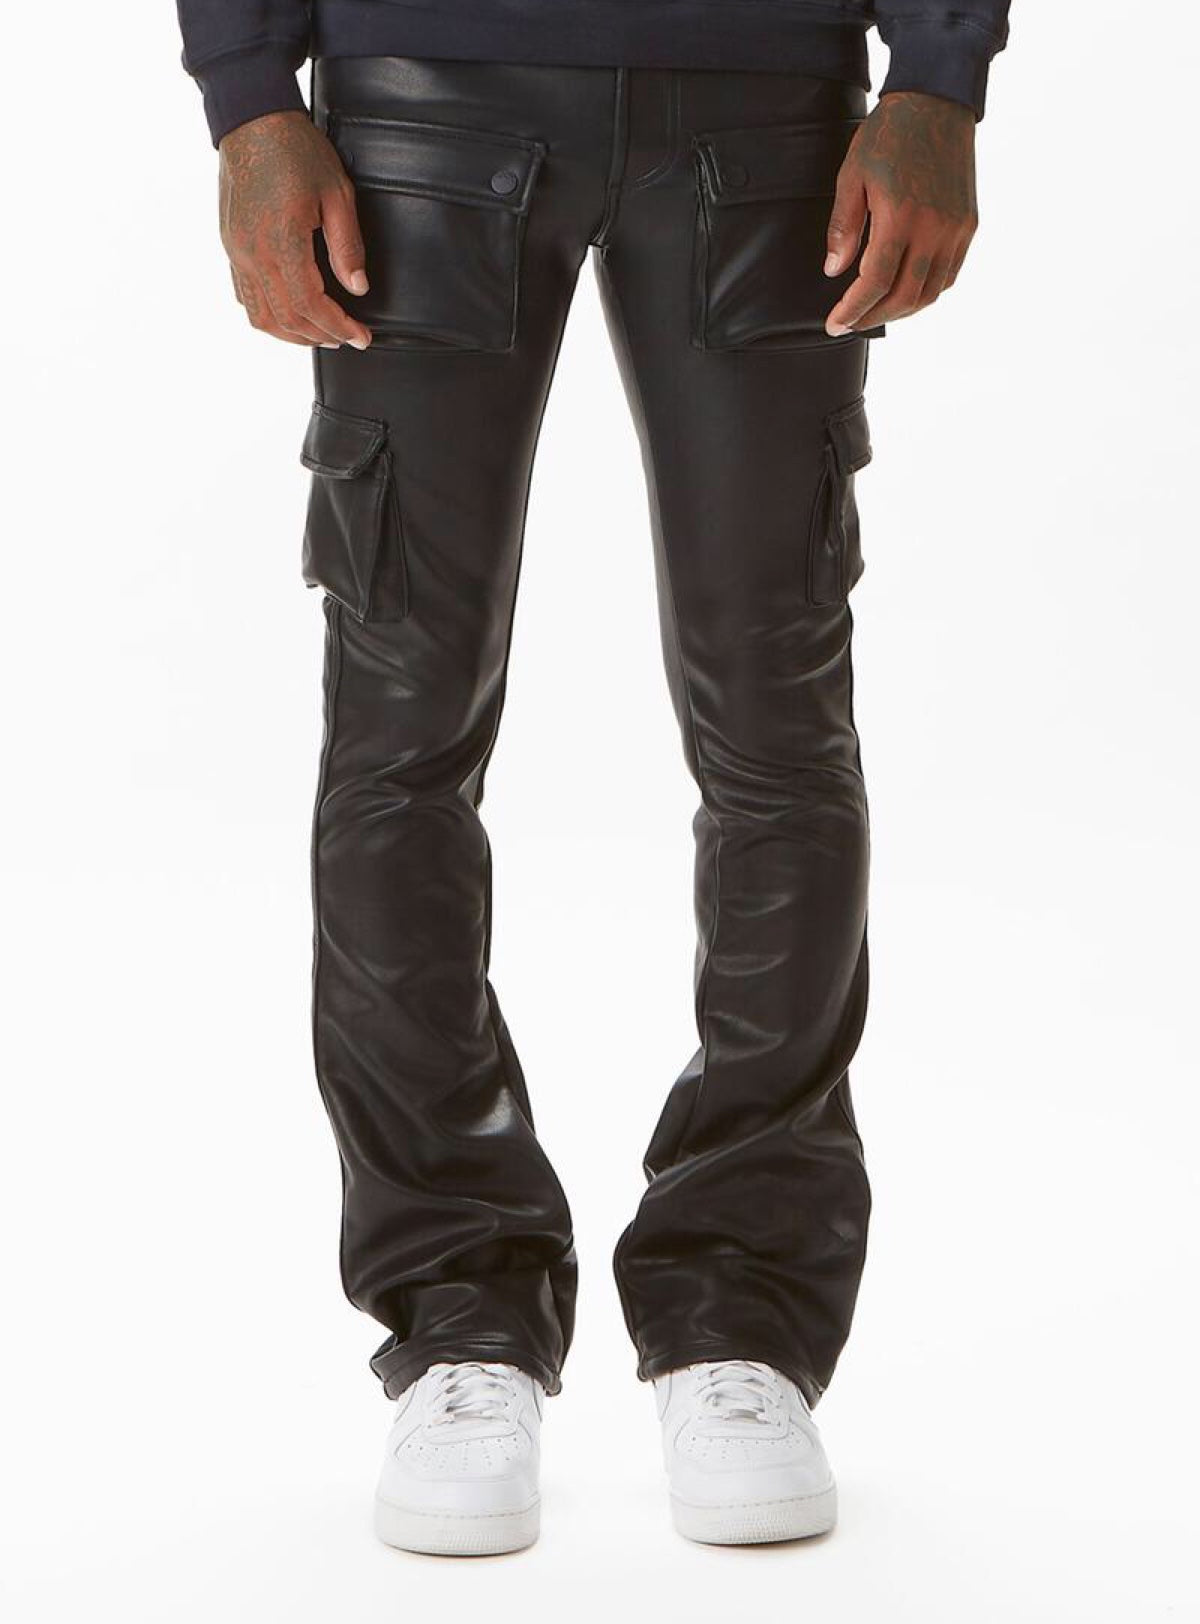 Rockstar Original Jeans Stacked Flare - Birch - Faux Leather